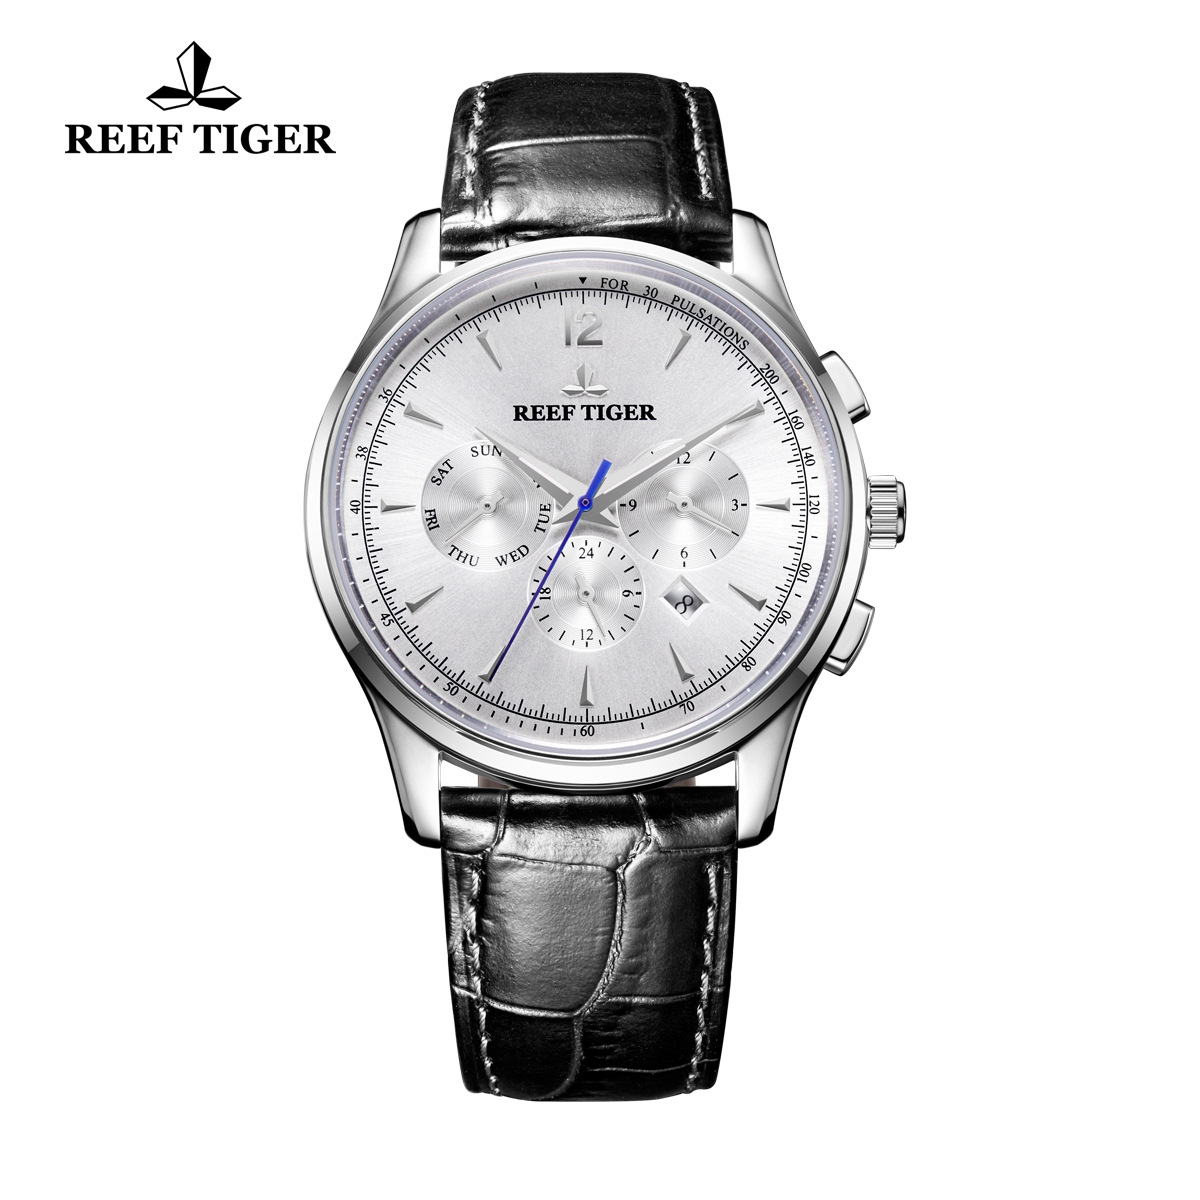 Reef Tiger Seattle Museum Dress Automatic Watch Steel White Dial Black Leather Strap RGA1654-YWB